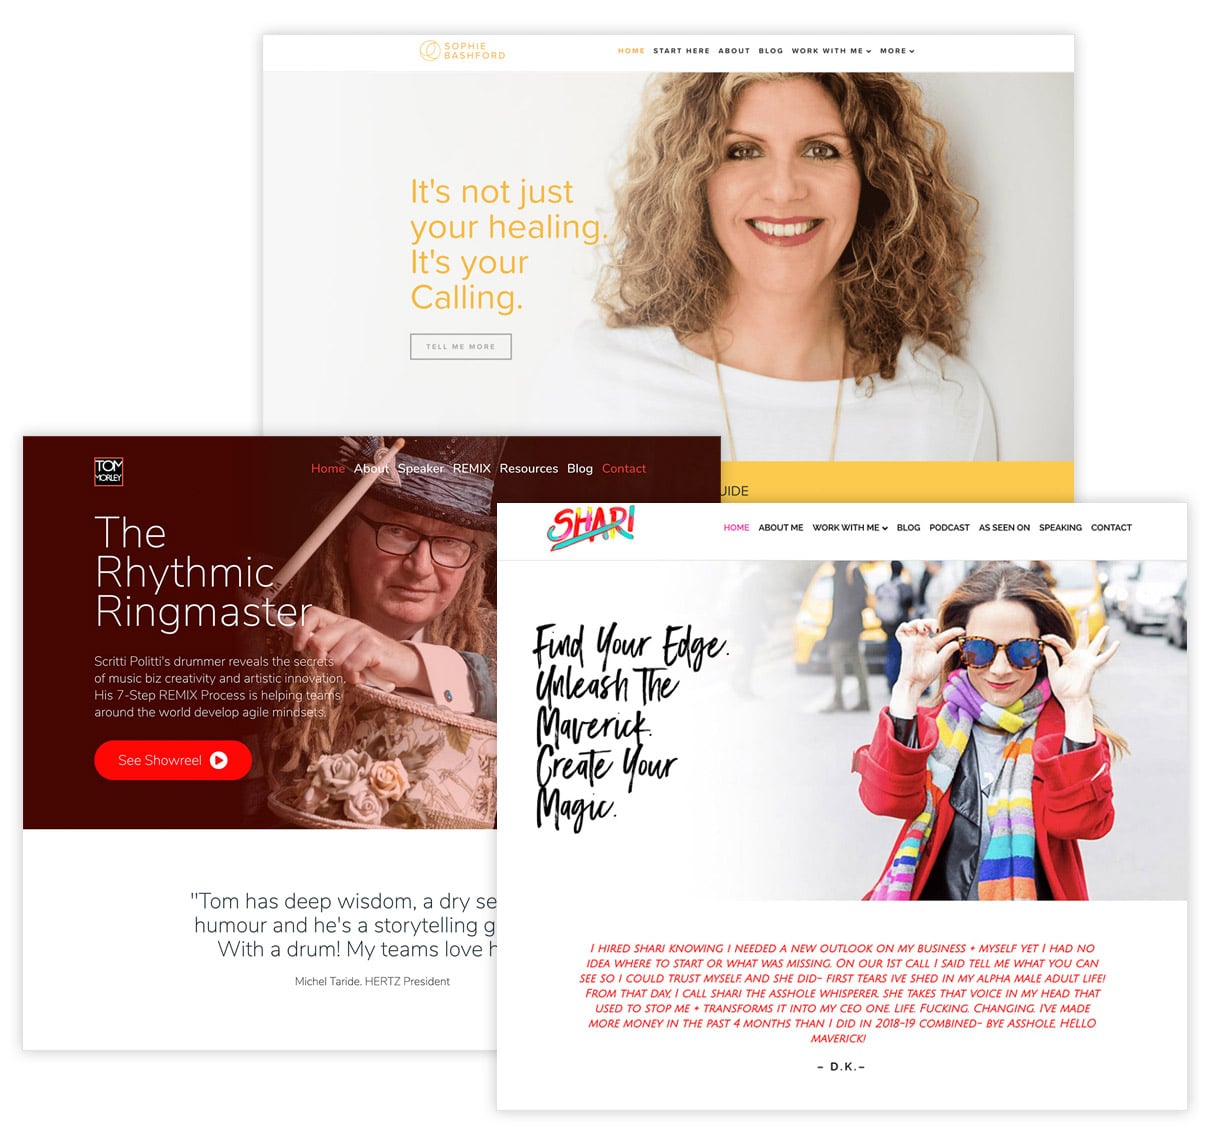 3 examples of a gret homepage with personality